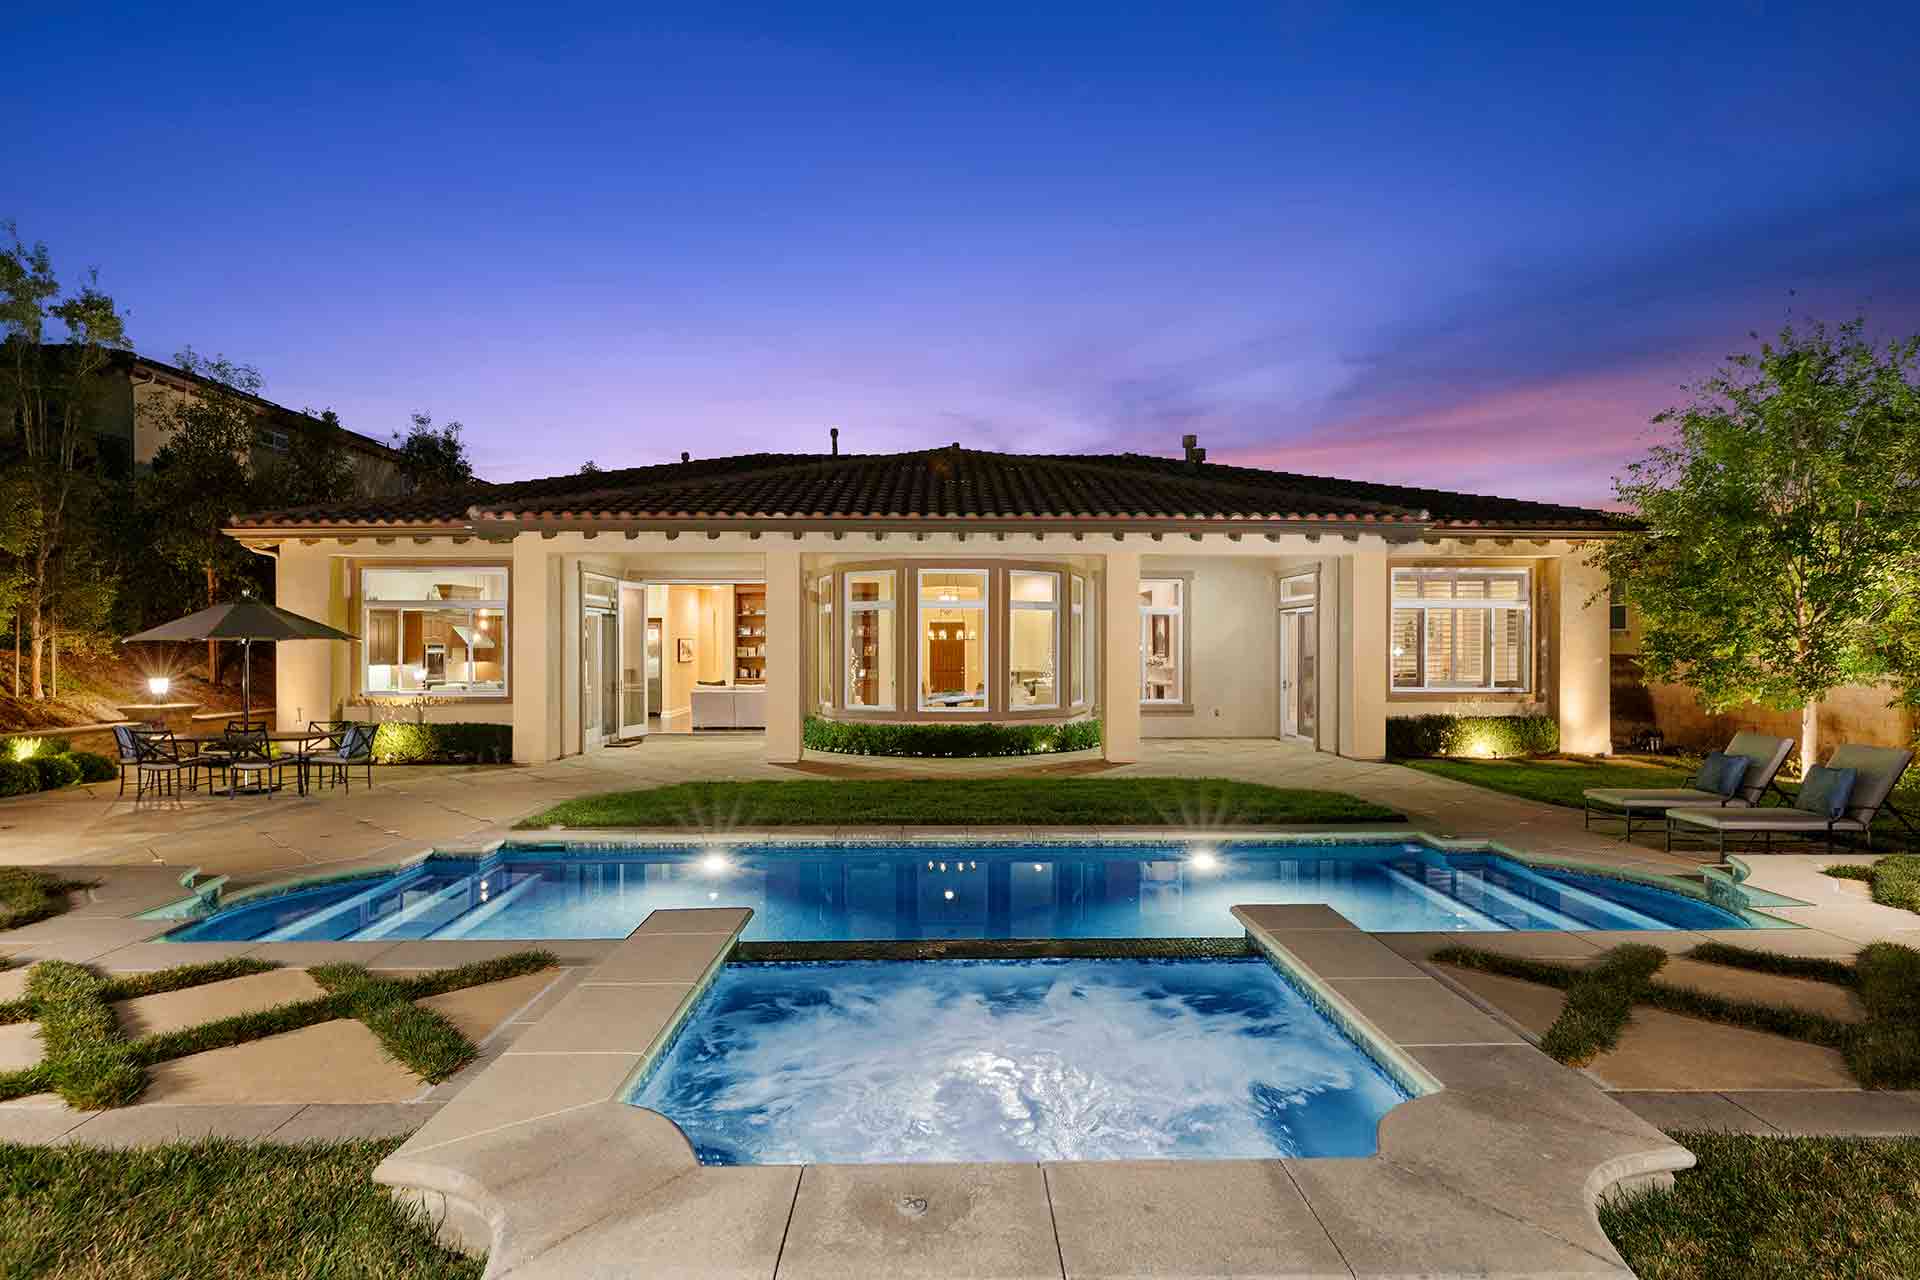 A swimming pool in front of a luxury house